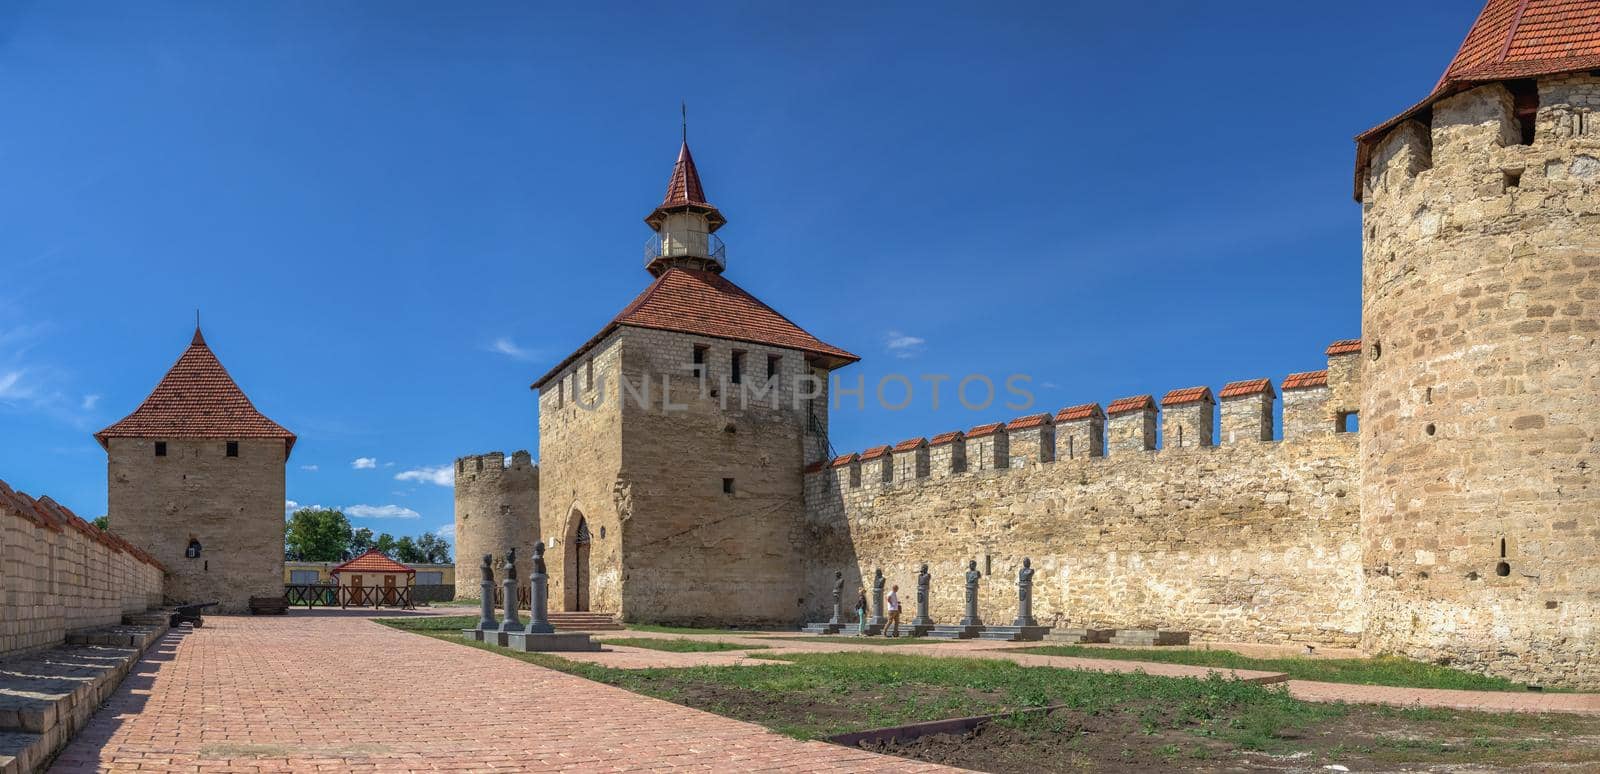 Fortress walls and towers of the Bender fortress, Moldova by Multipedia